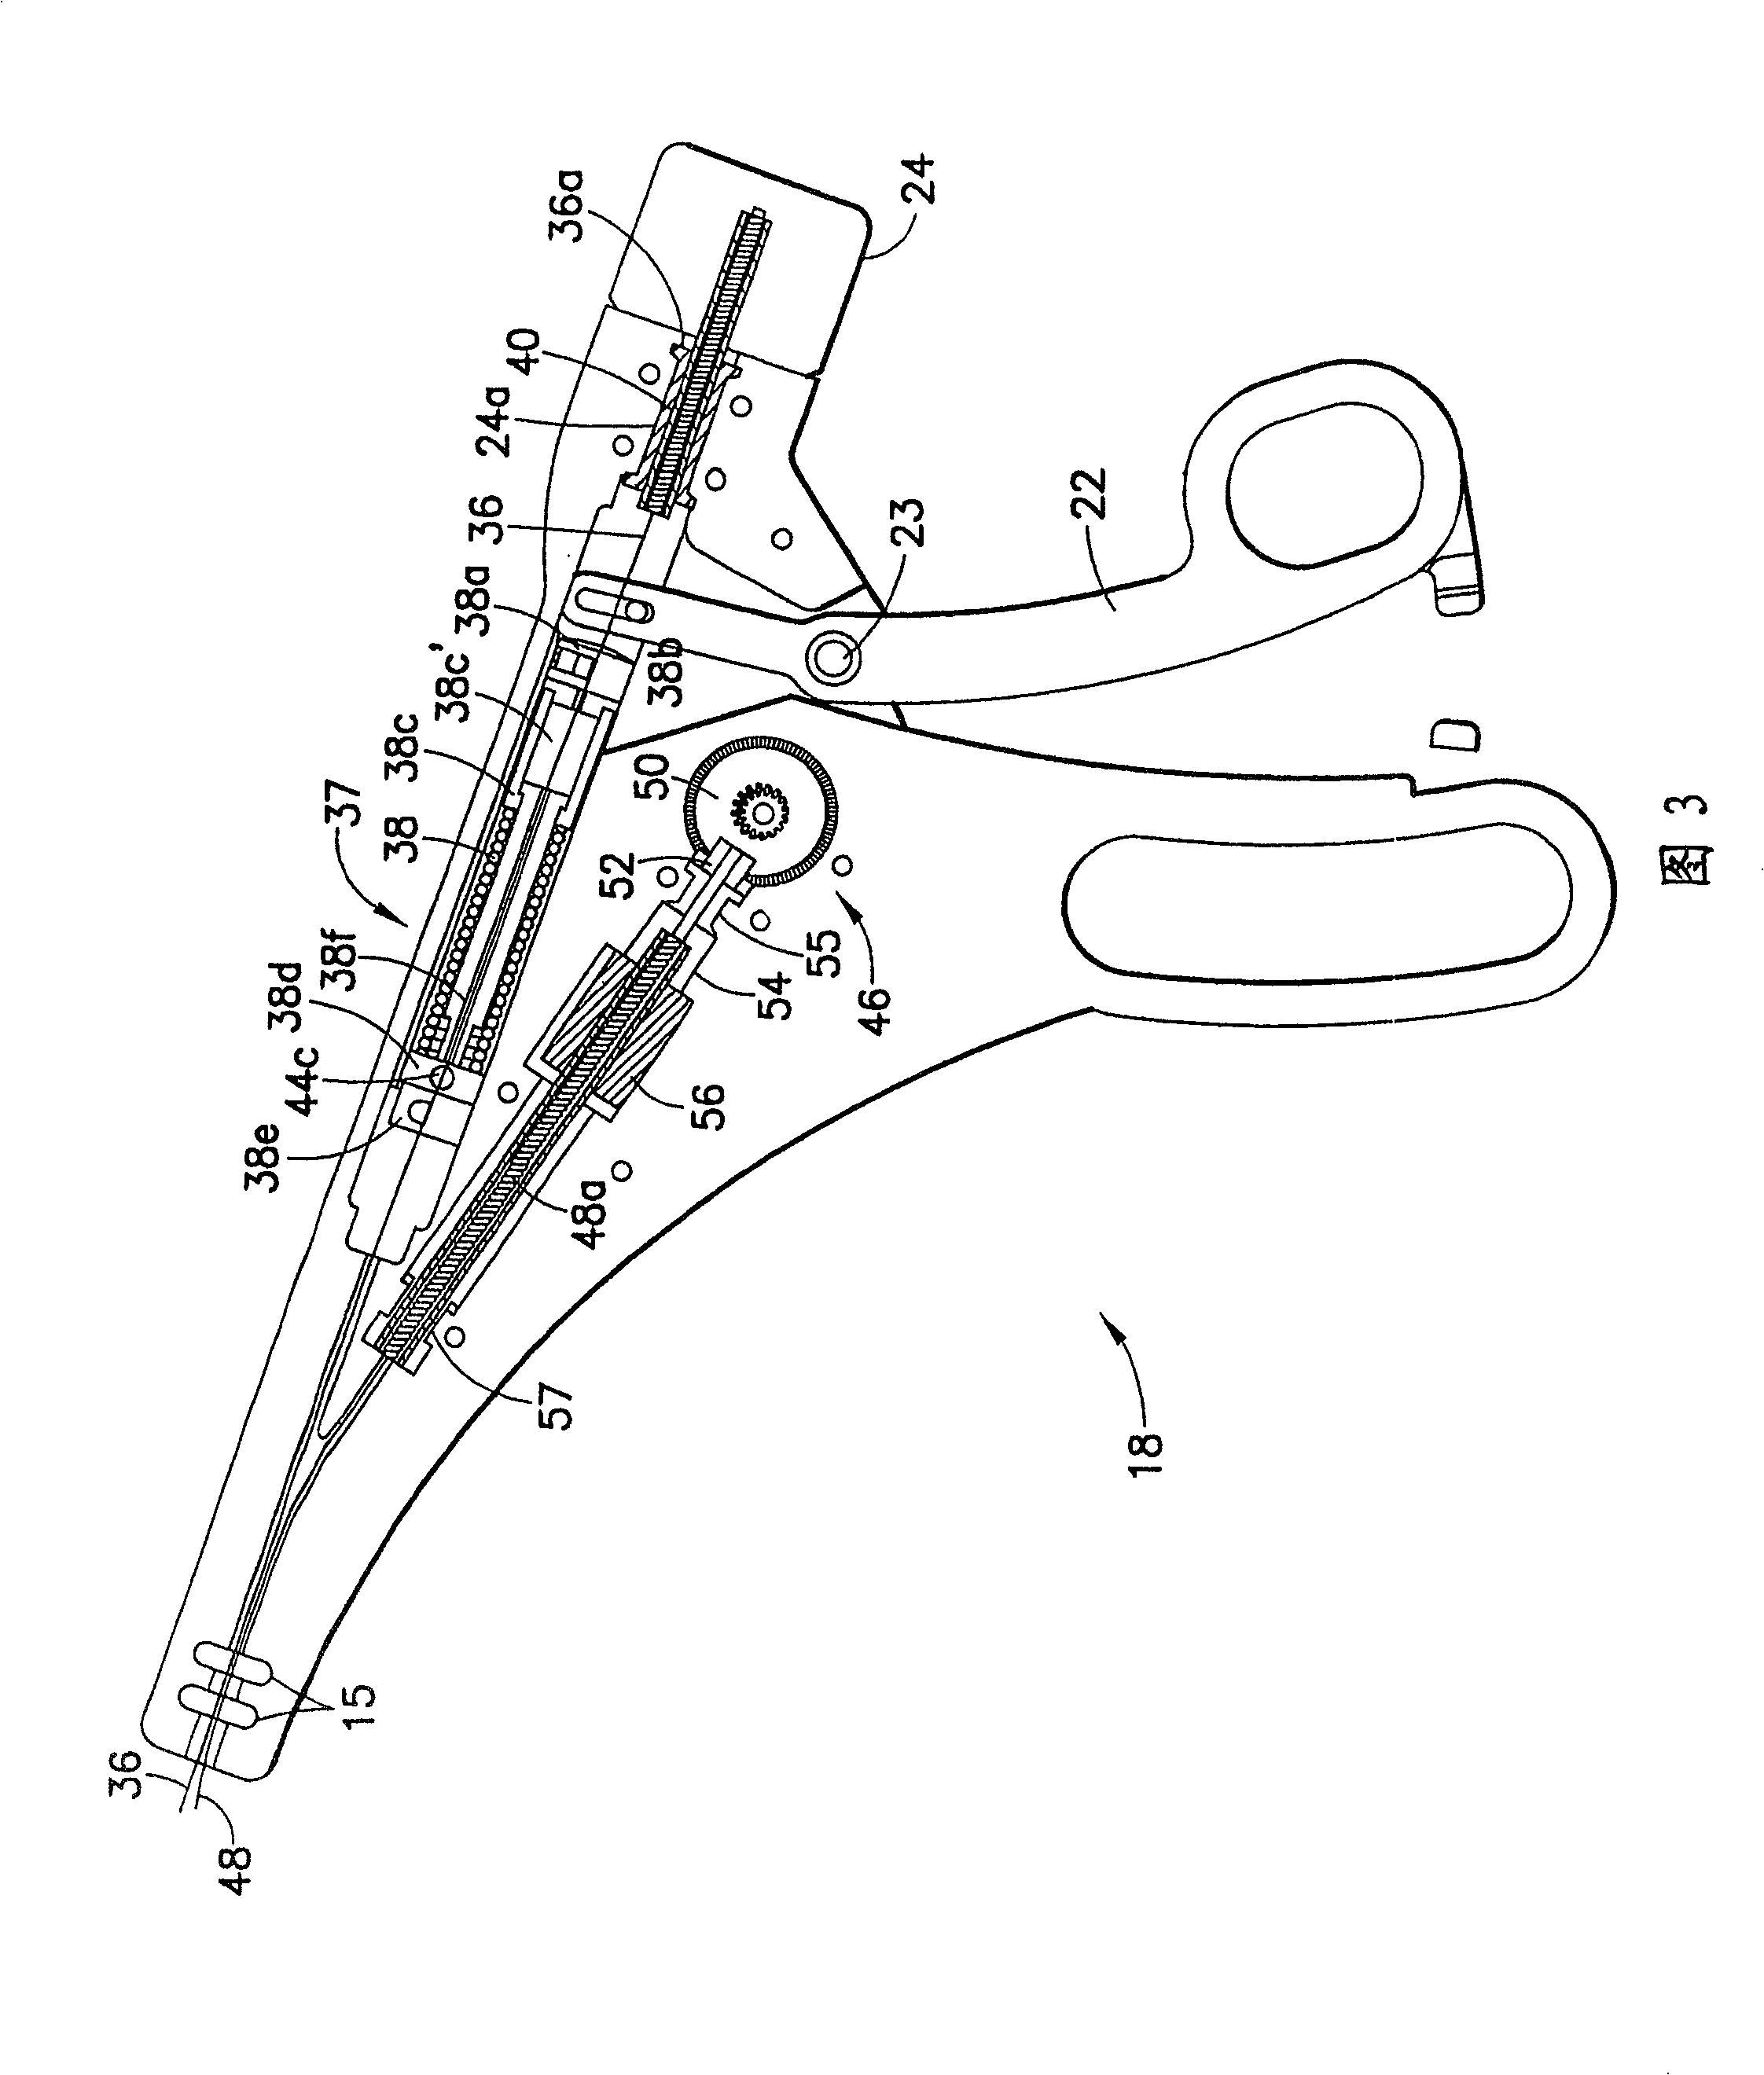 Endoscopic clip applier with hermaphroditic jaws mounted on non-collinear axes